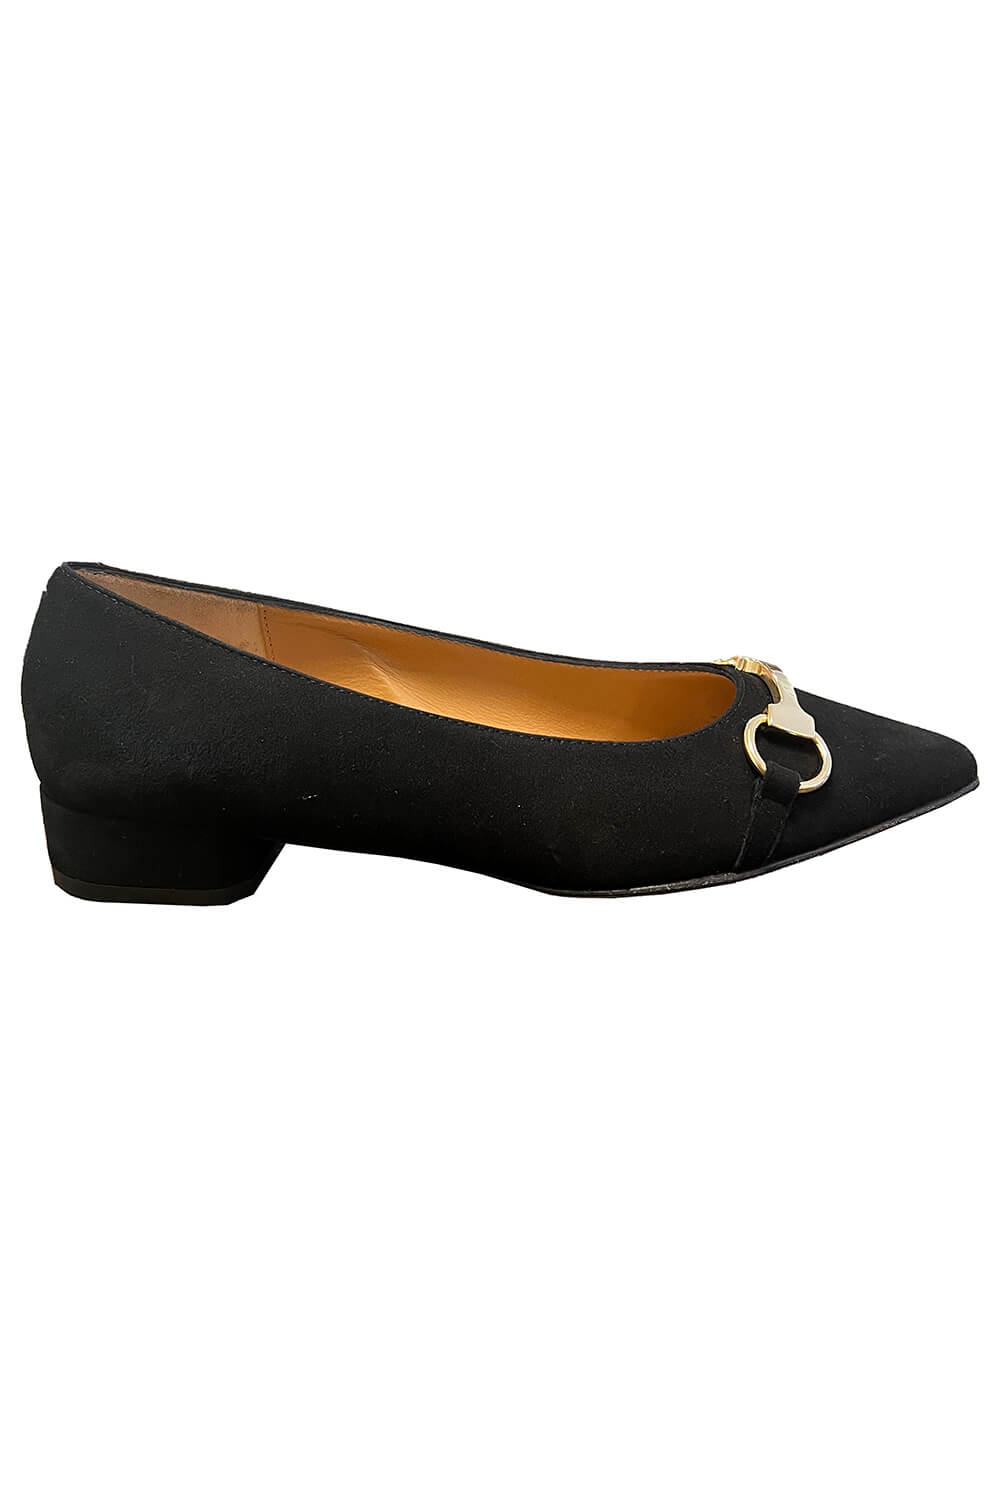 MODA DI FAUSTO black suede leather ballerinas with golden bridle charm